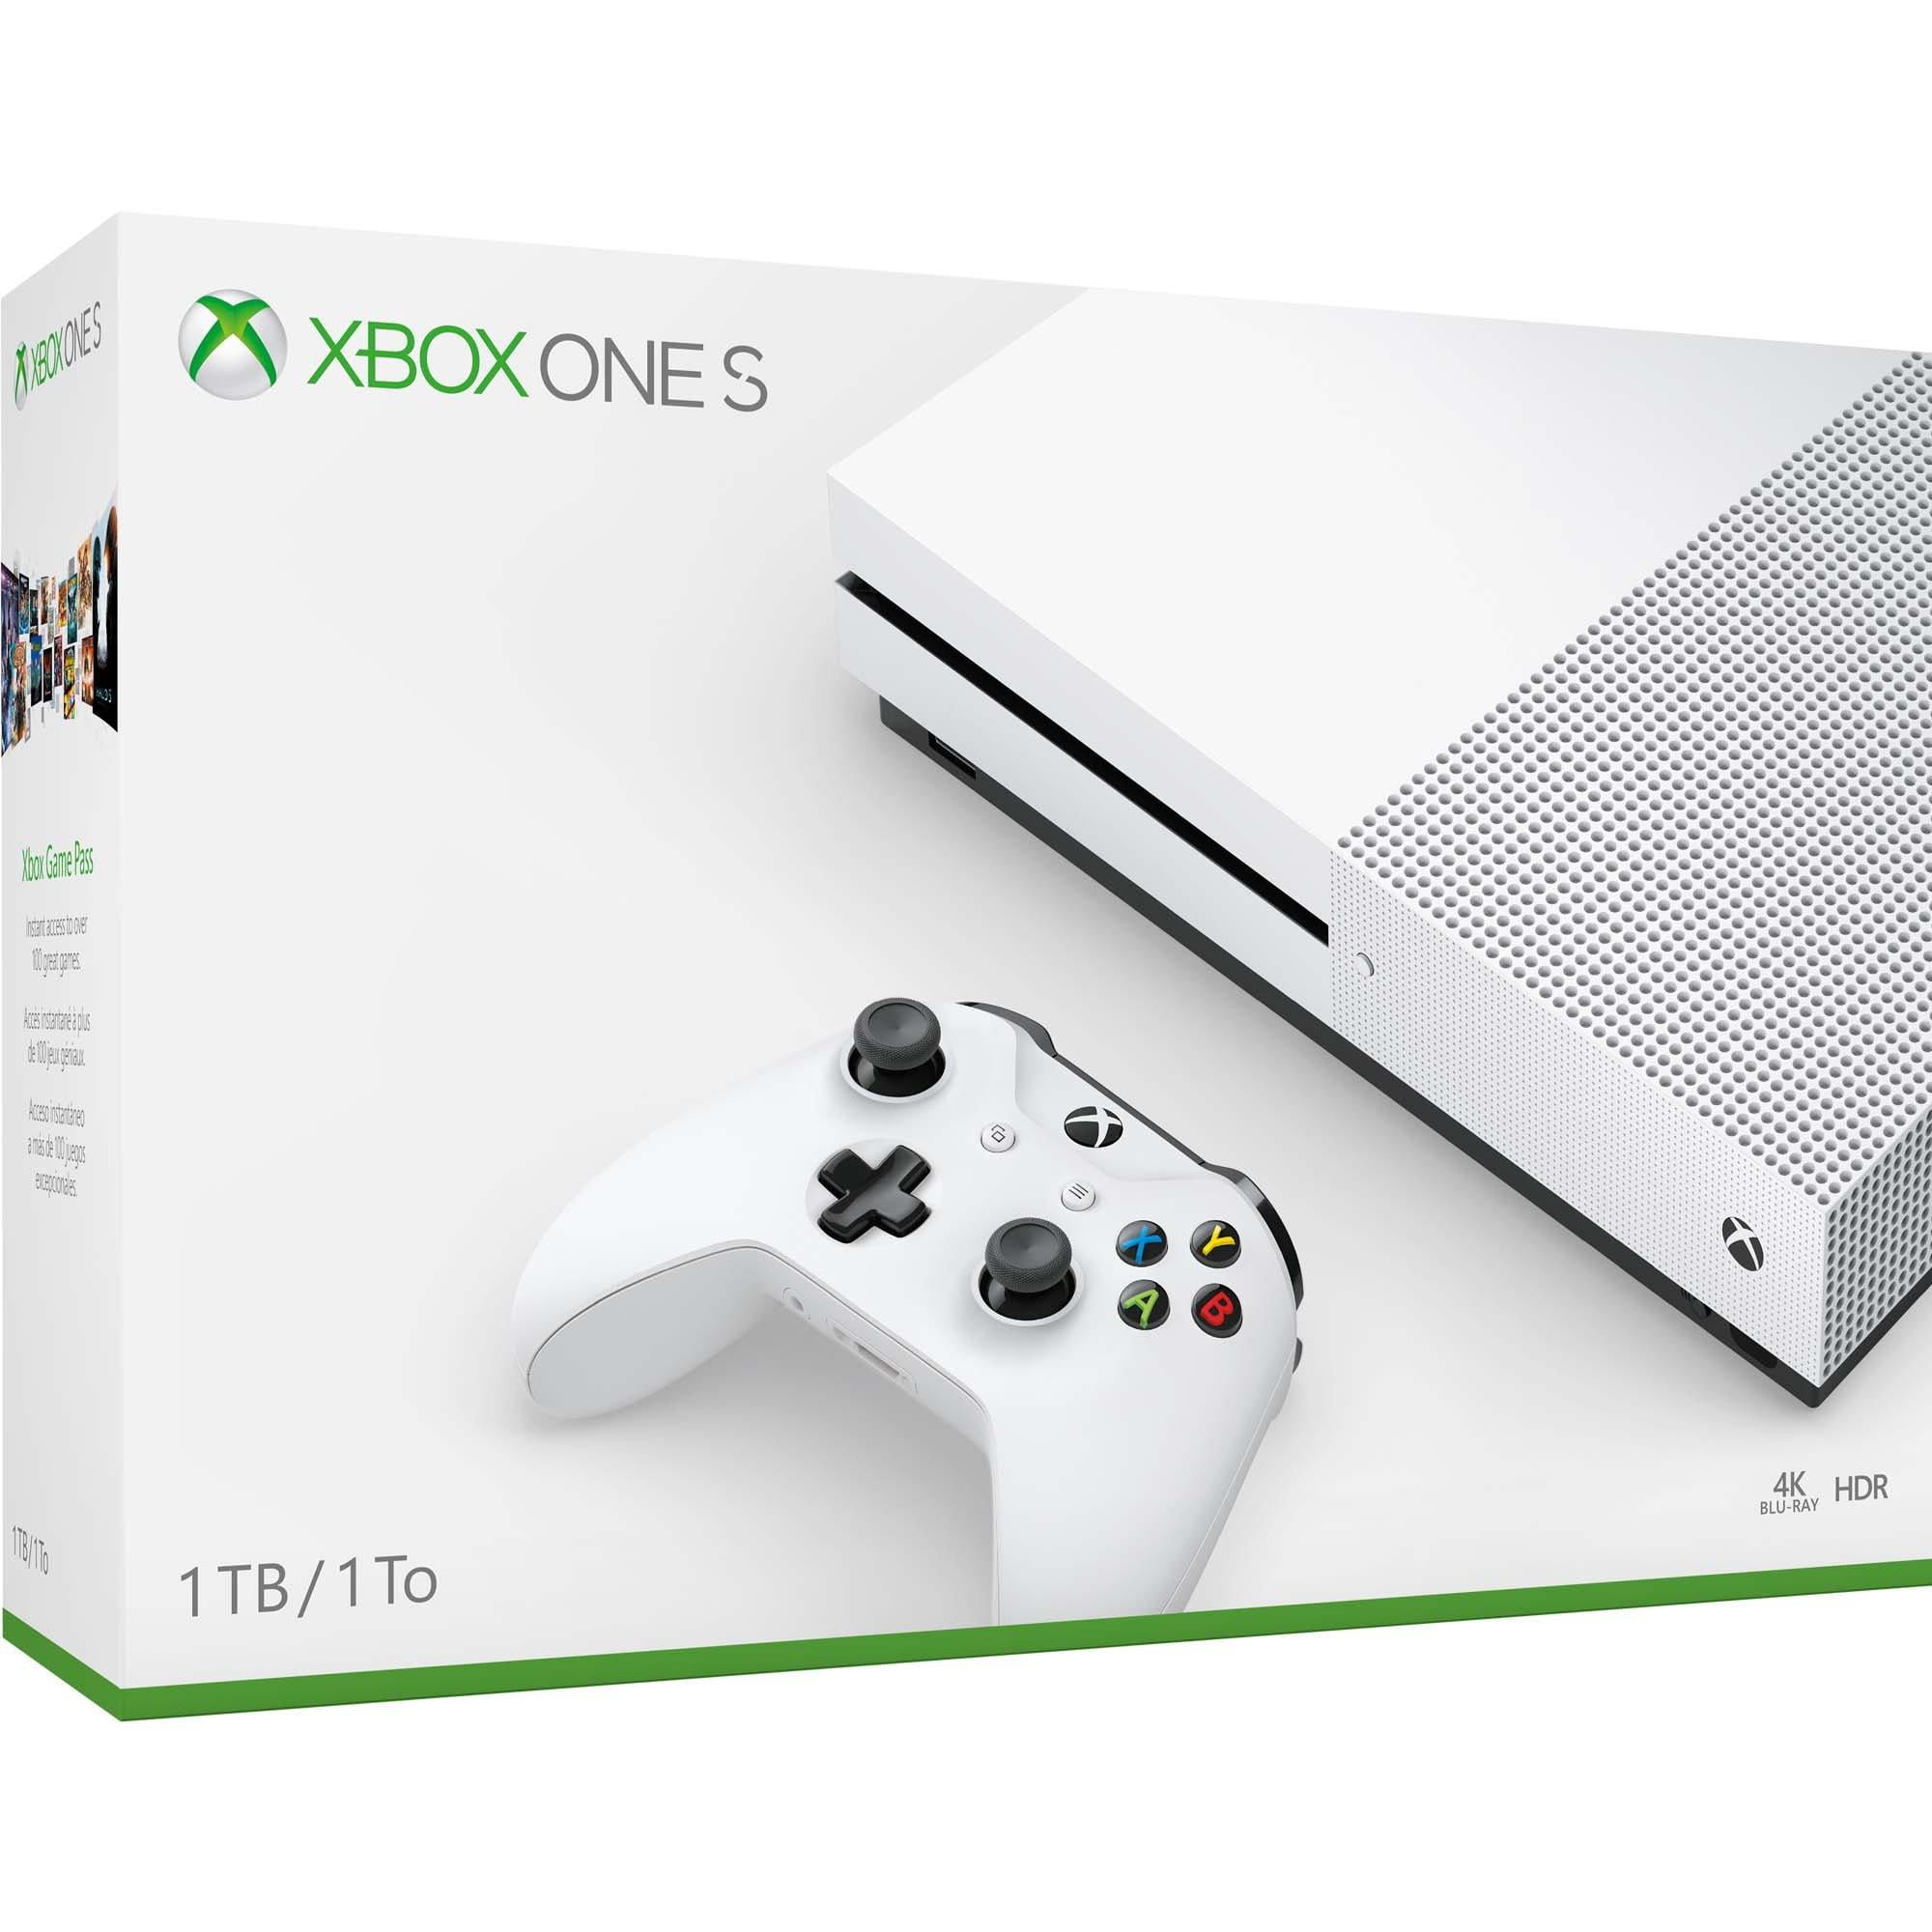 Microsoft 234-00051 Xbox One S White 1TB Gaming Console with HDMI Cable  (USED)